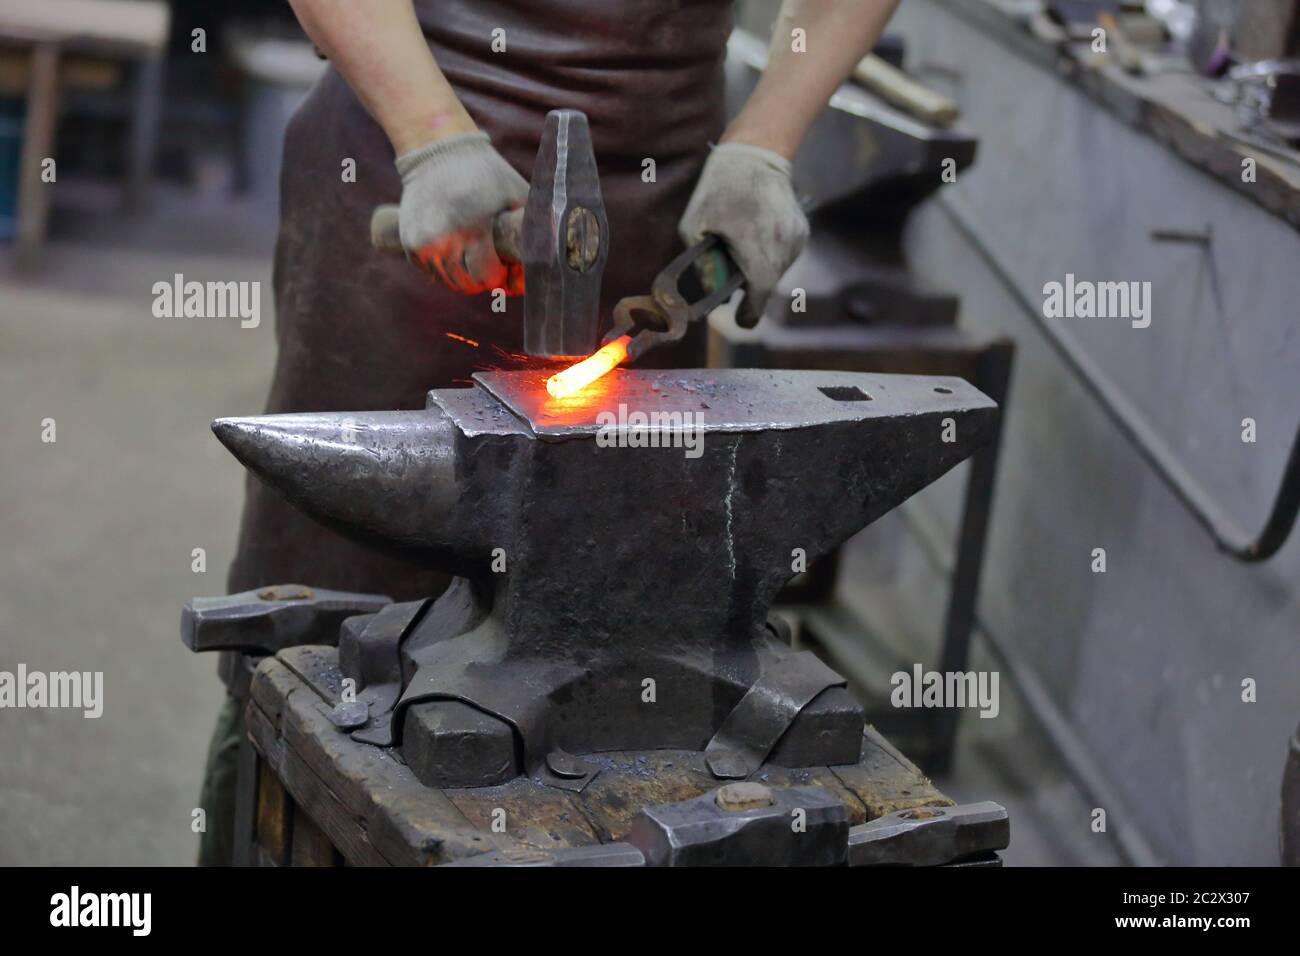 The process of manufacturing a craft product in a forge Stock Photo